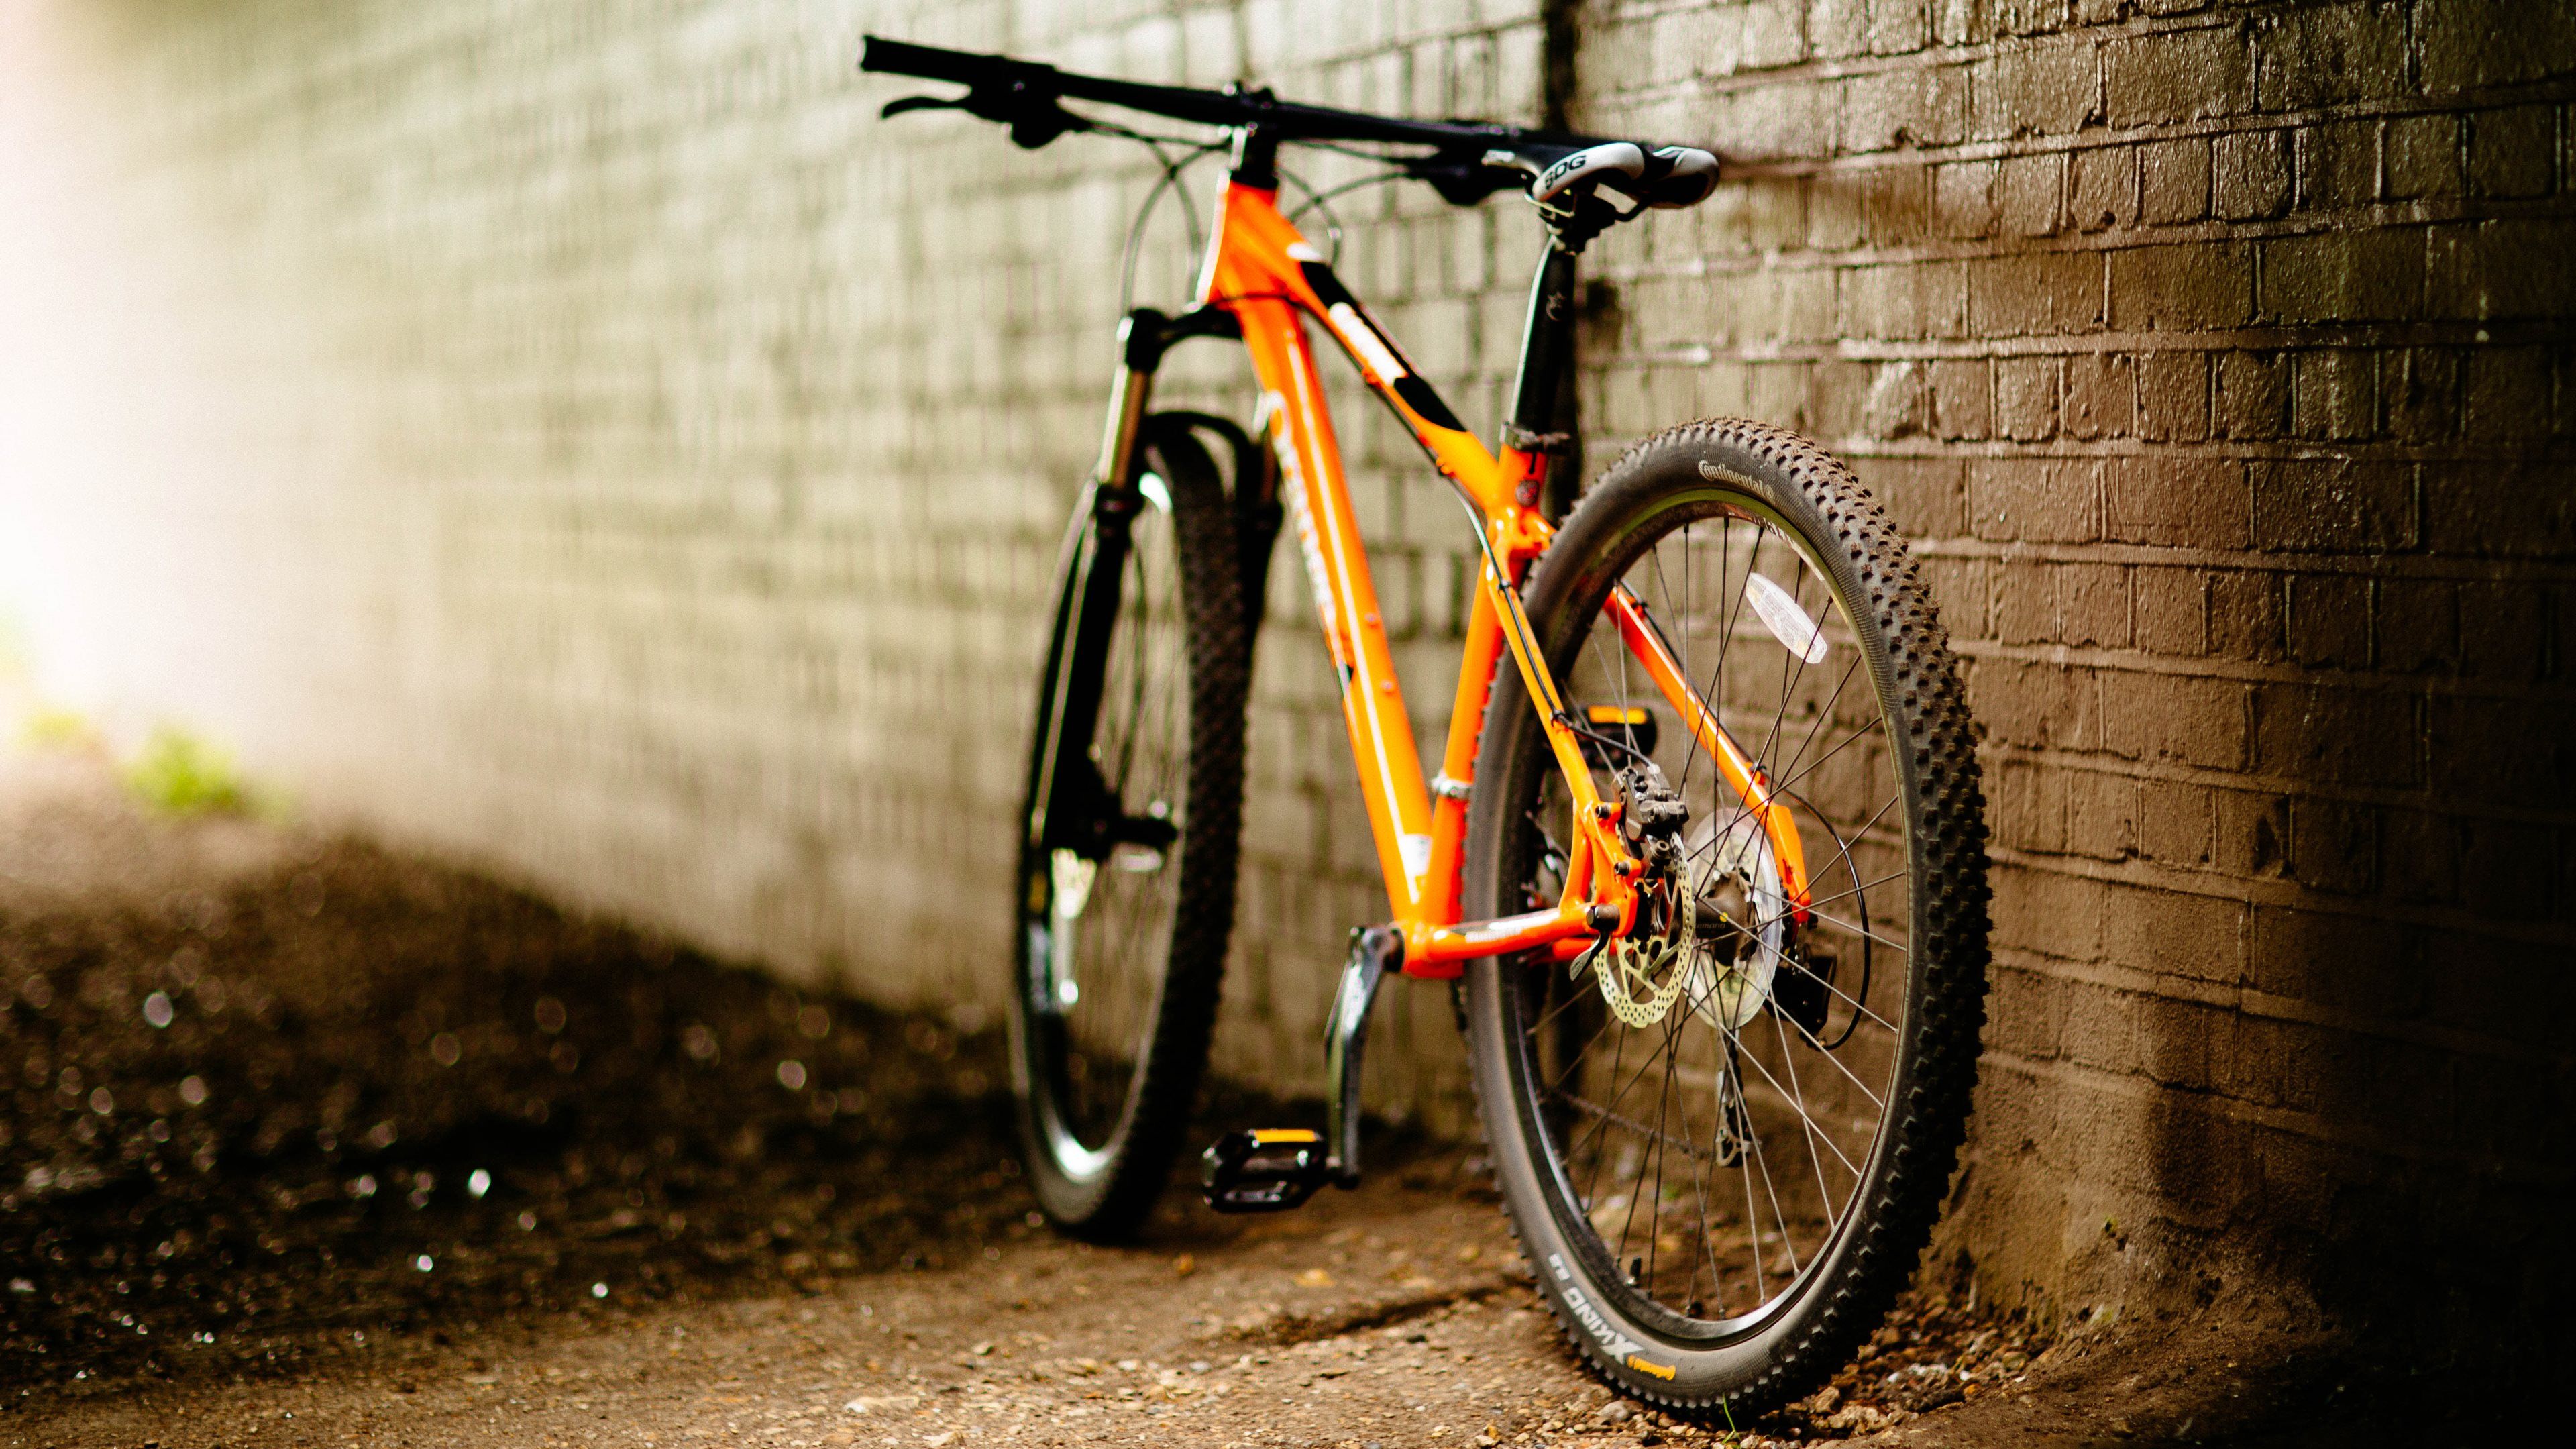 HD Creative Bicycle Picture, Full HD Wallpaper